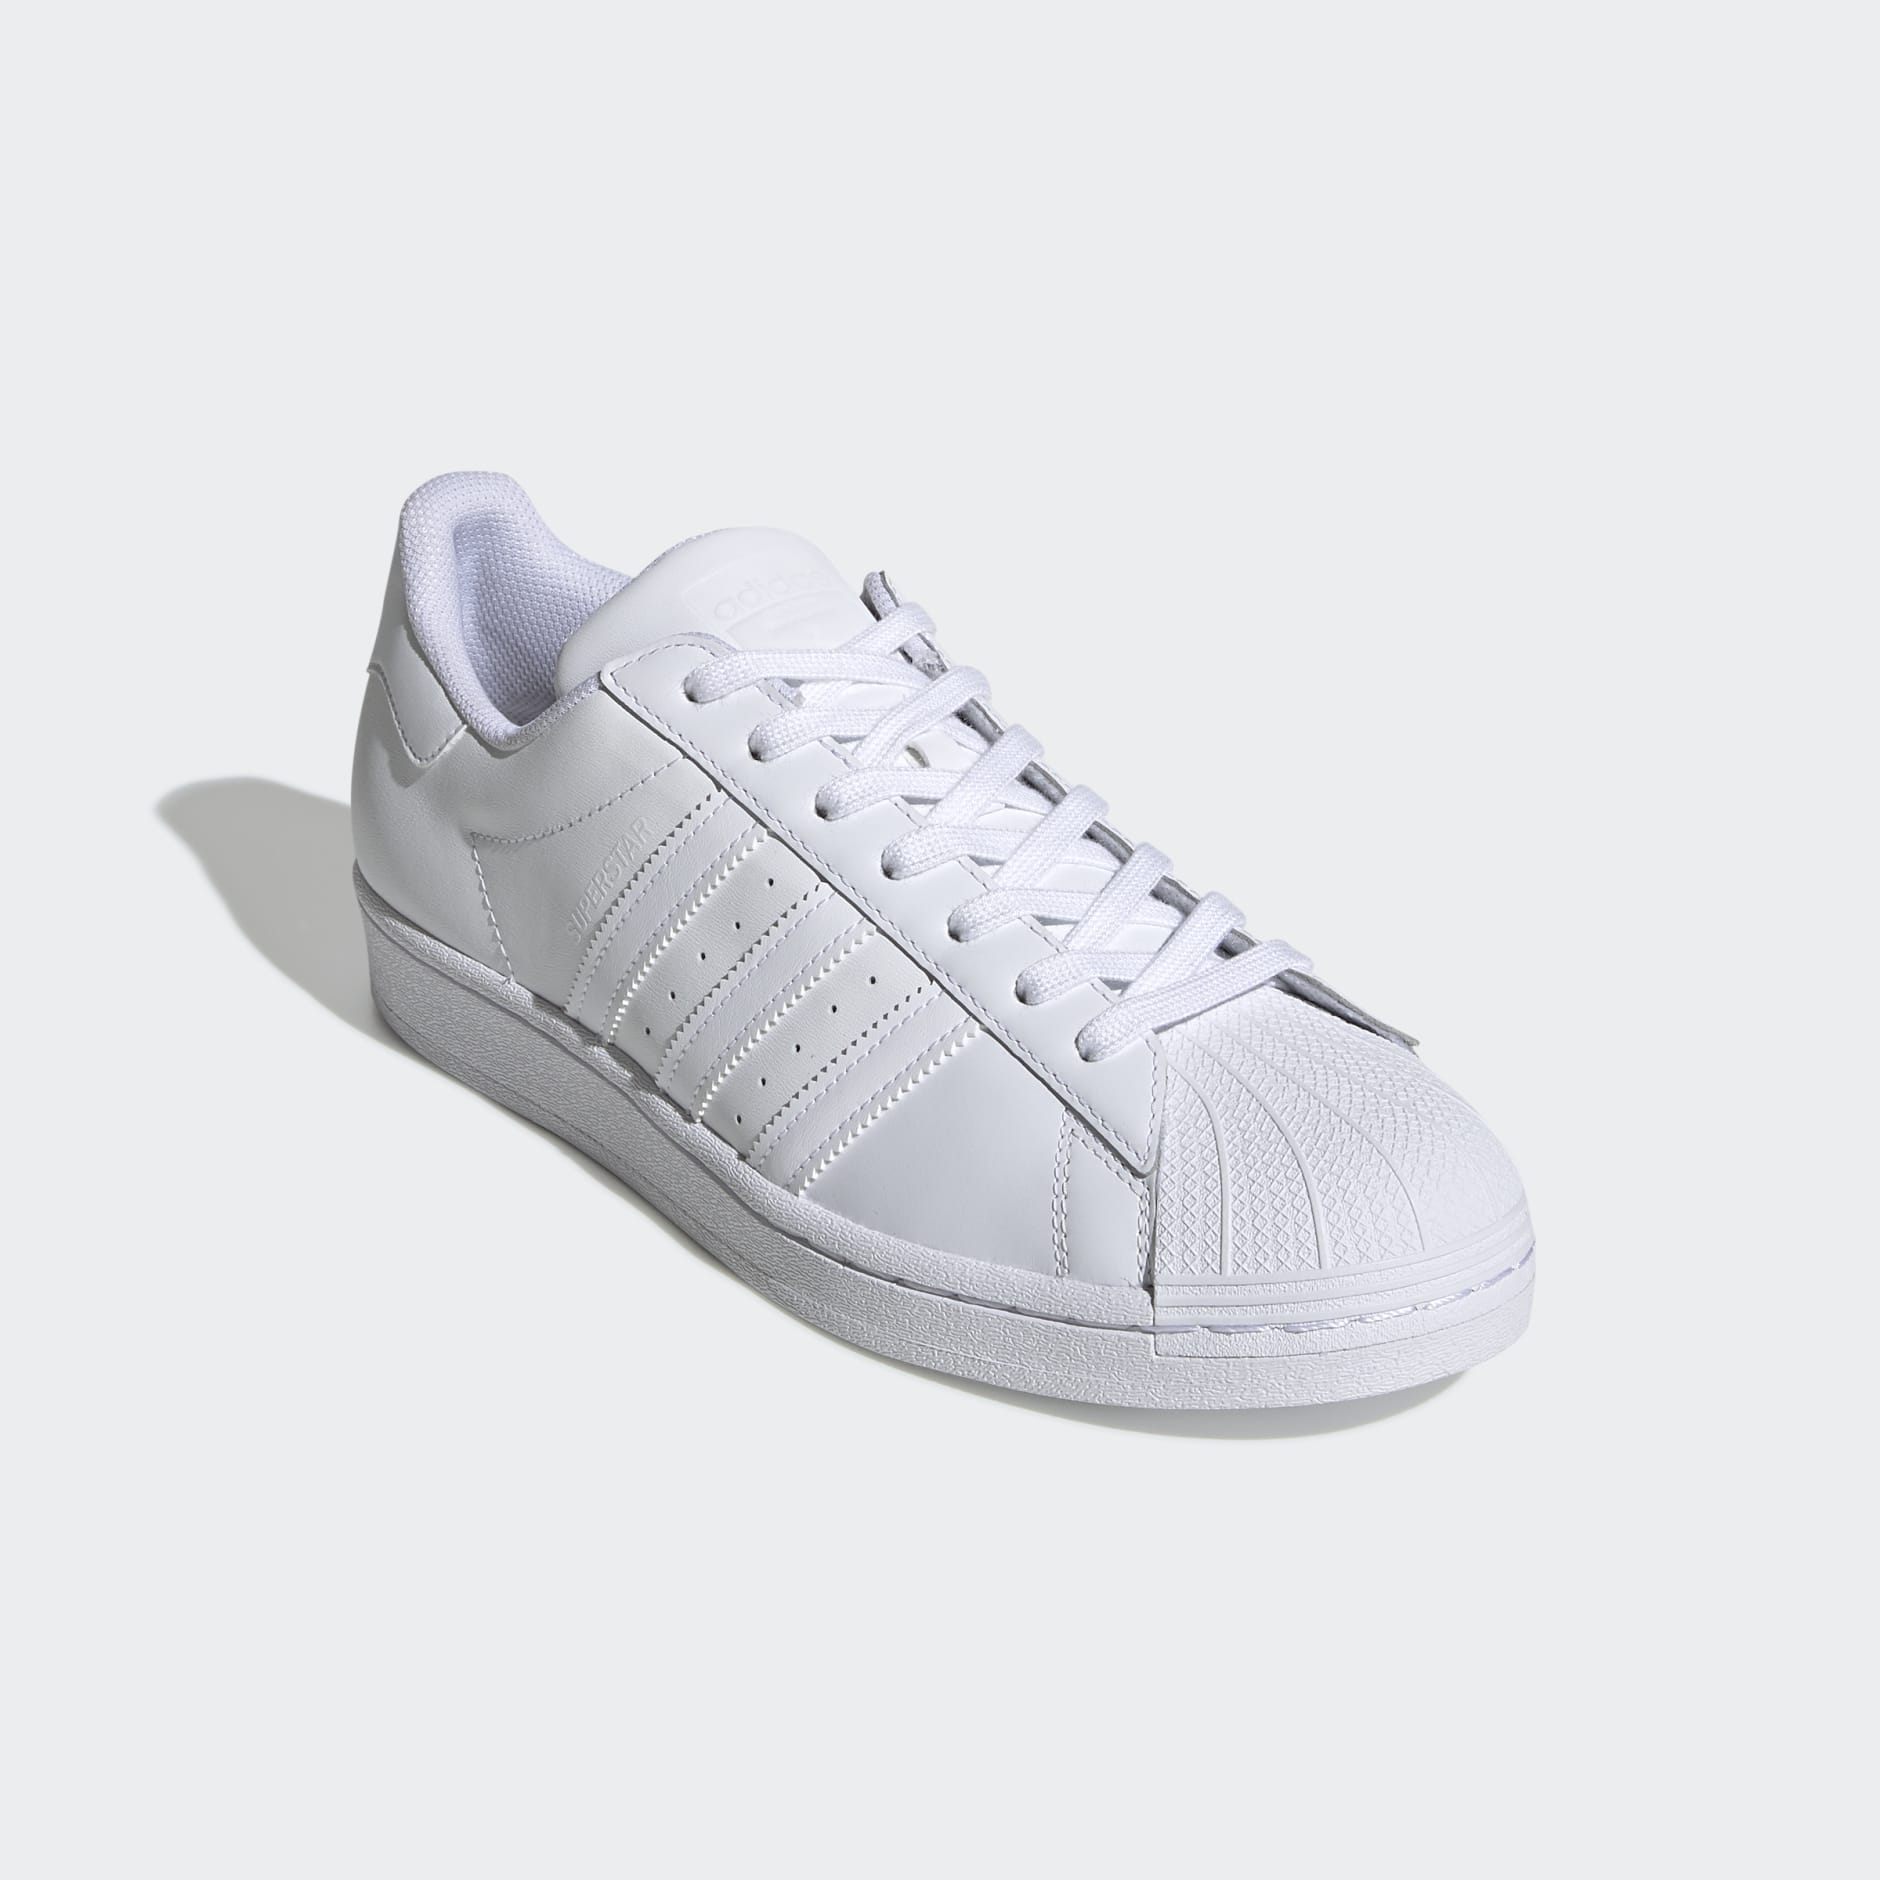 Shoes - Superstar Shoes - White | adidas Kuwait